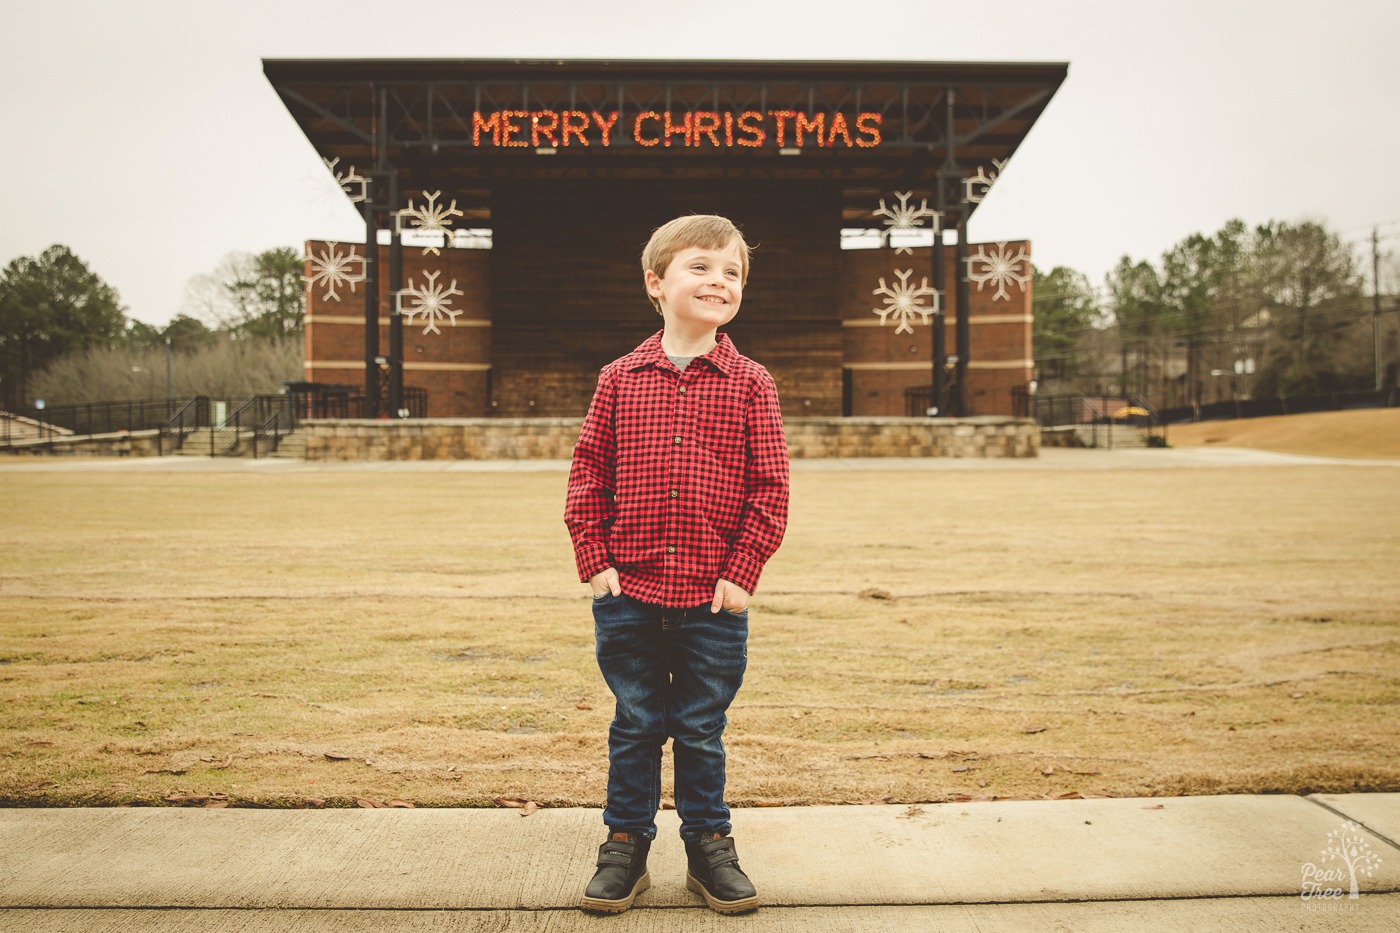 Cute little boy smiling with his hands in pockets with downtown Woodstock amphitheatre behind him. Merry Christmas and snowflake lights are lit up